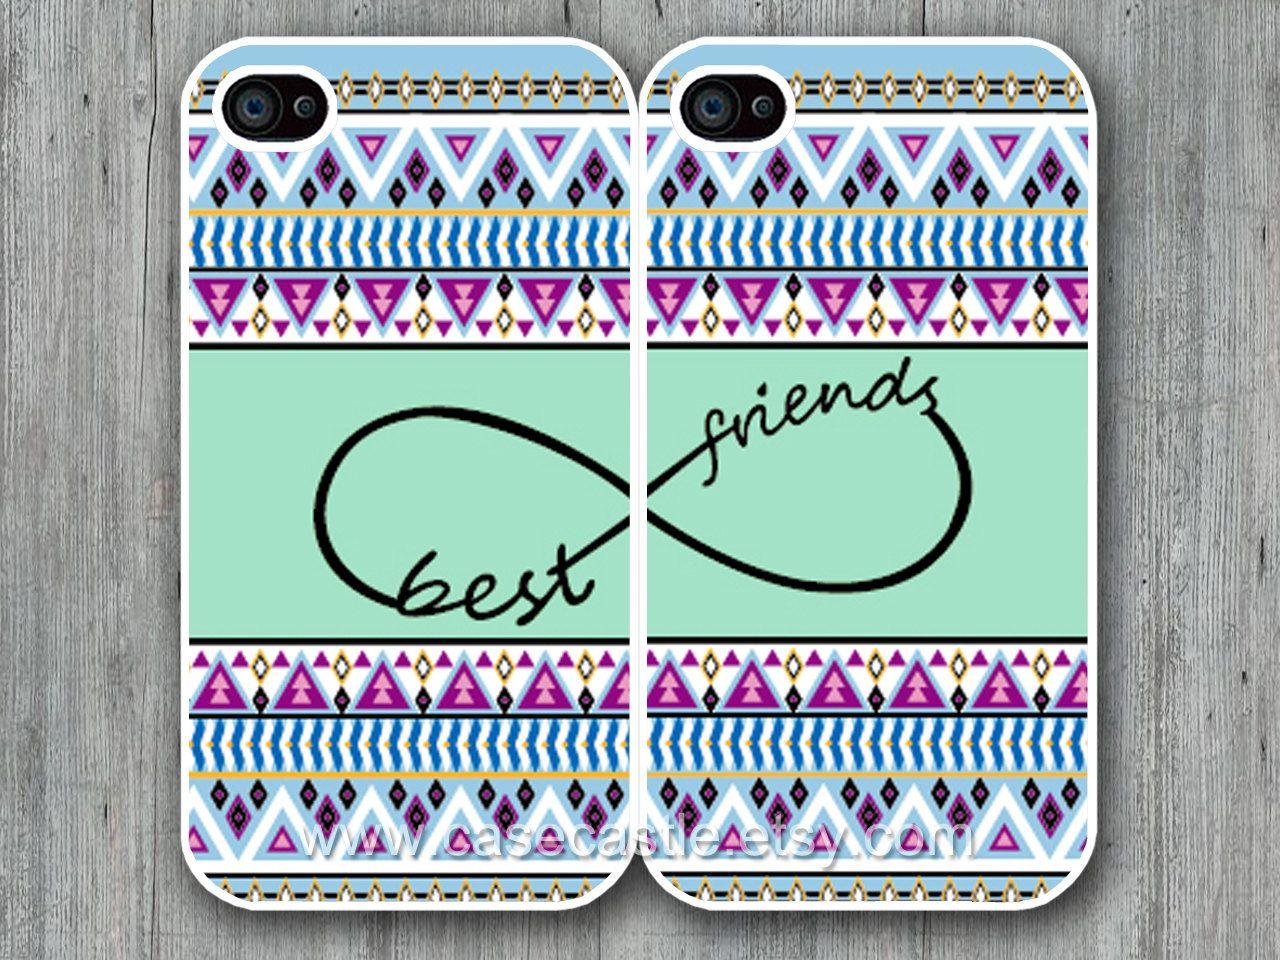 cool iphone 4s cases 2015 4s